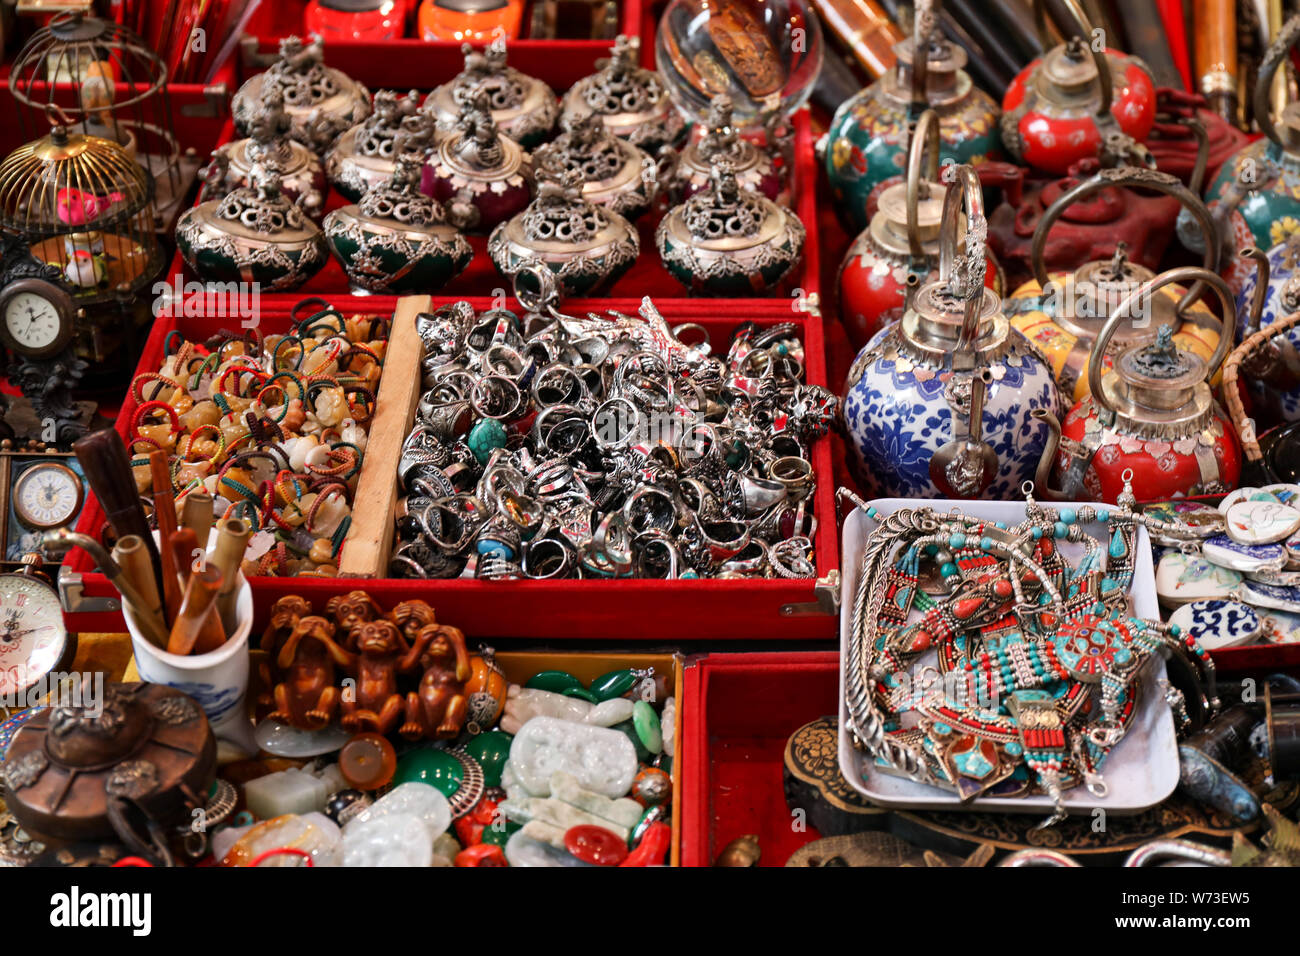 Miscellaneous items sold on Cat Street Flea Market in Hong Kong Stock Photo